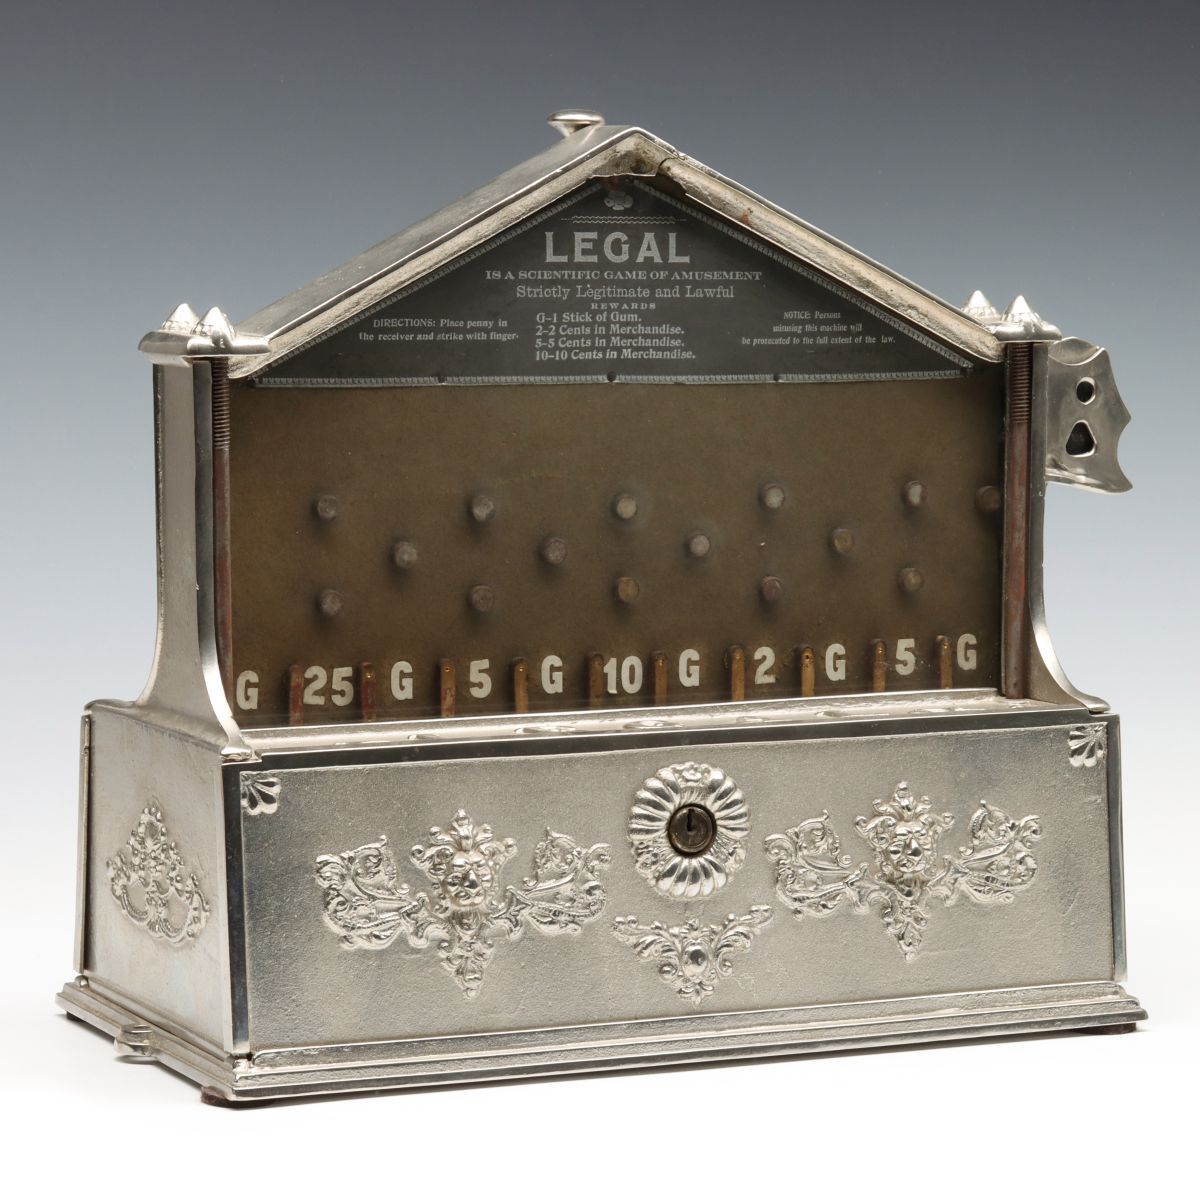 AN A.J. FISHER & CO. 1909 TRADE STIMULATOR THE LEGAL